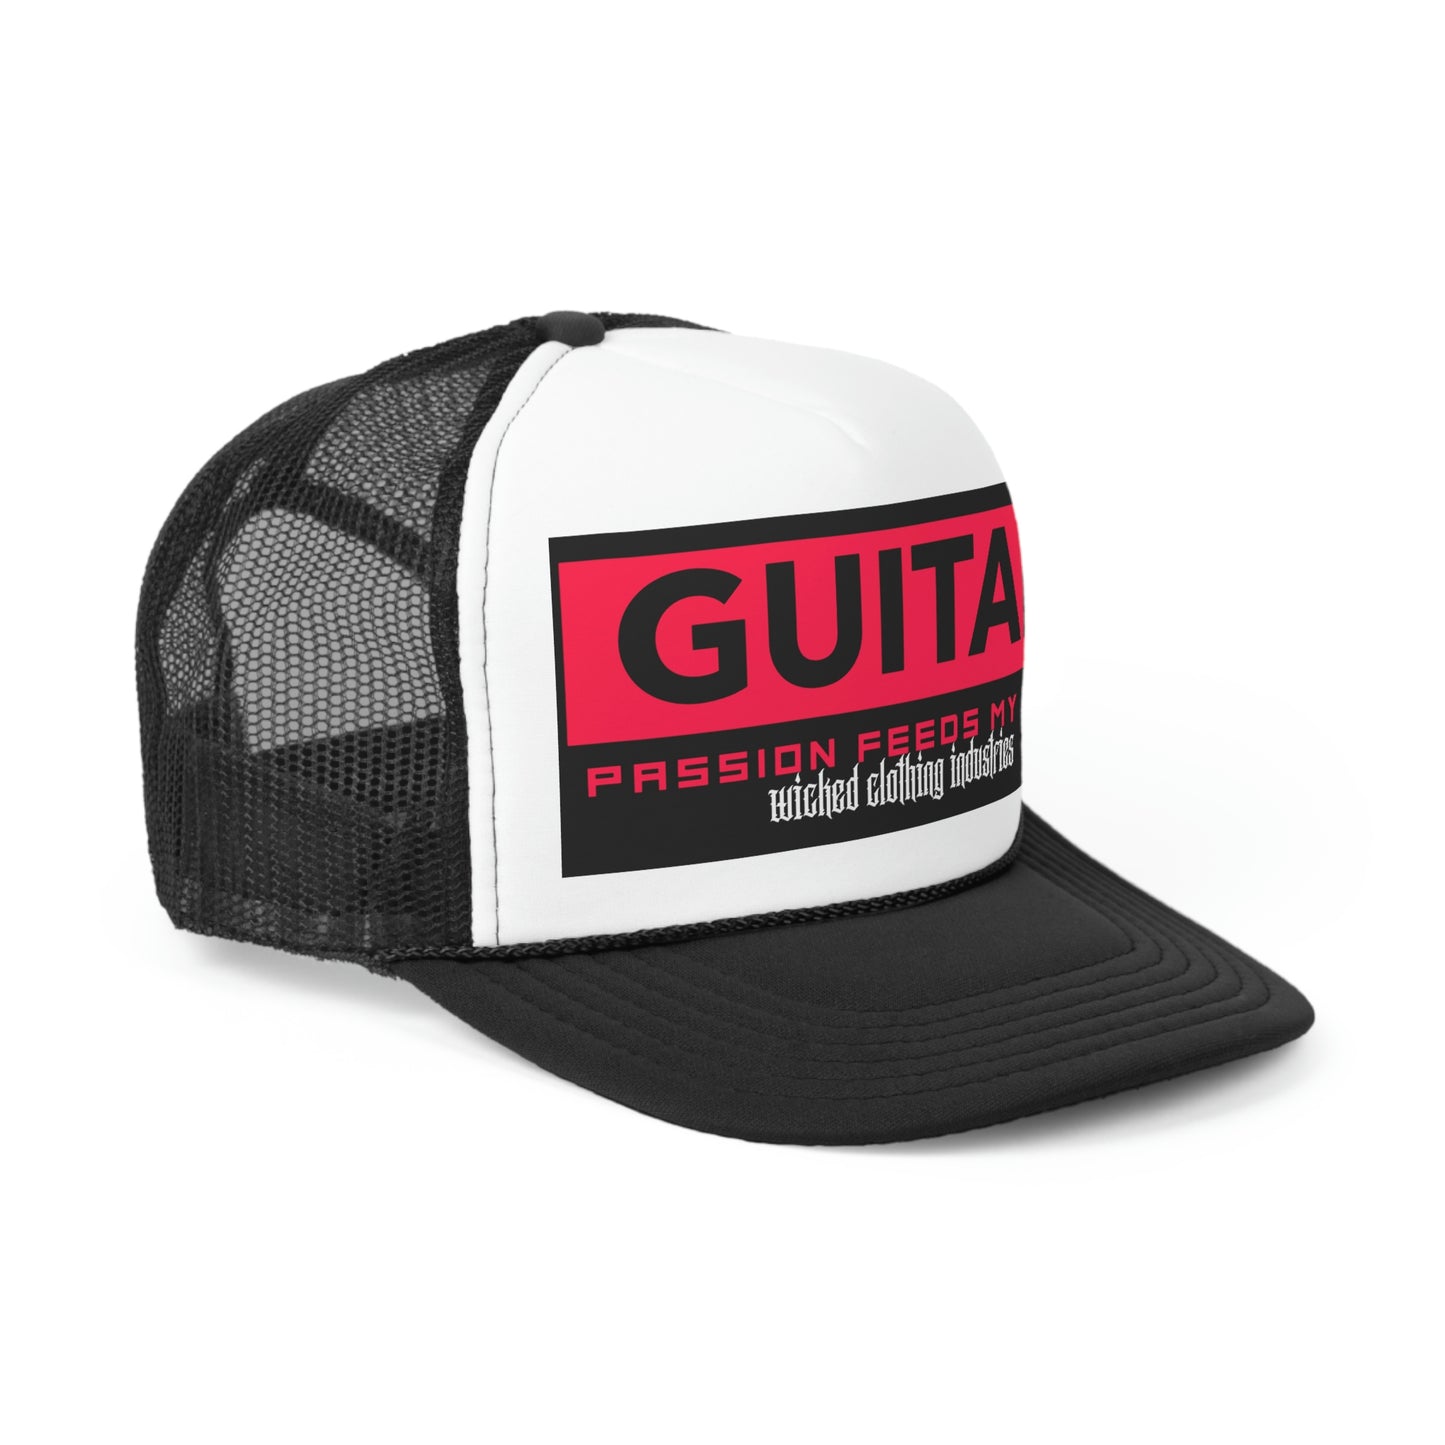 Guitar Passion Feeds My Soul Red/ Black Trucker Hat